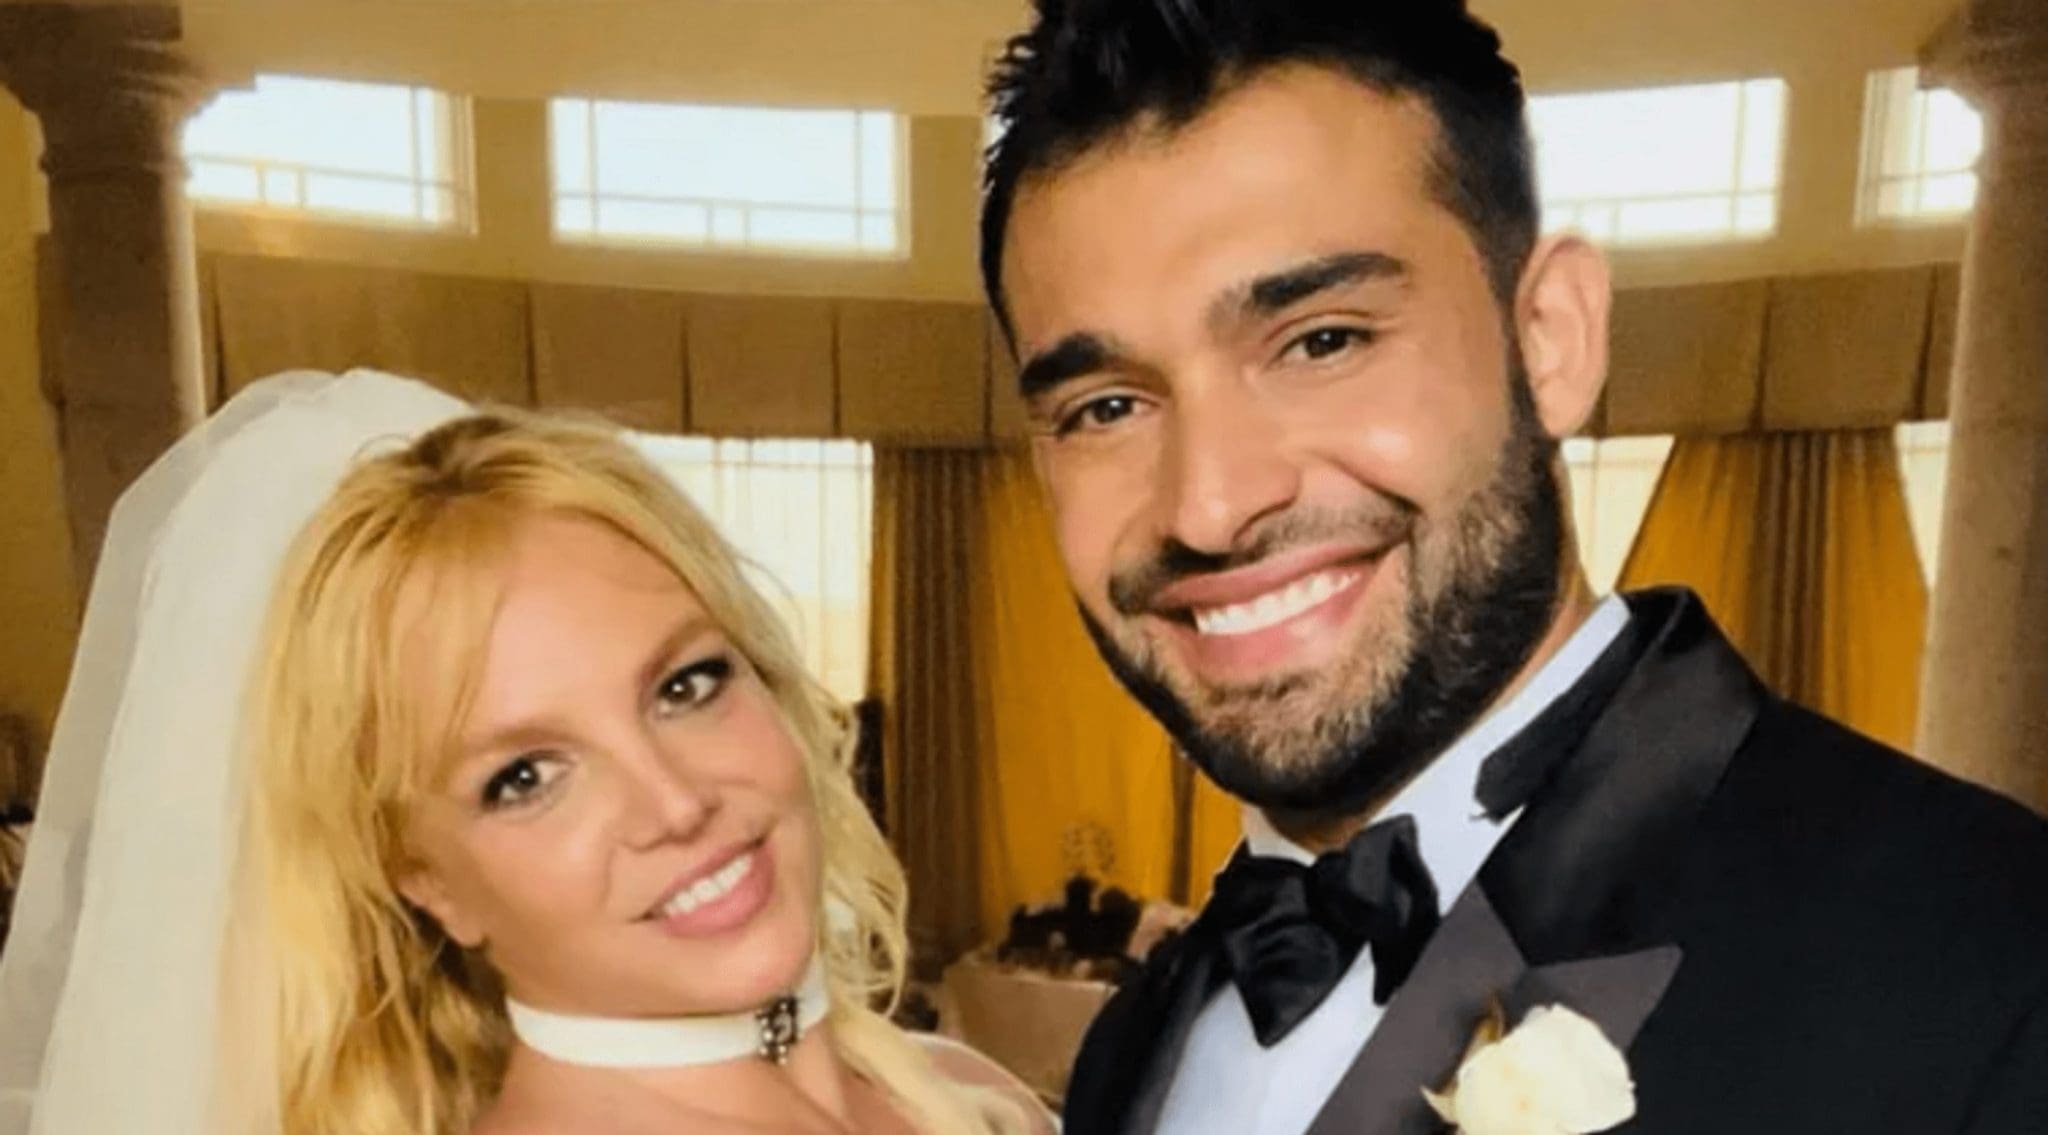 Britney Spears shares romantic videos from her wedding with Sam Asghari